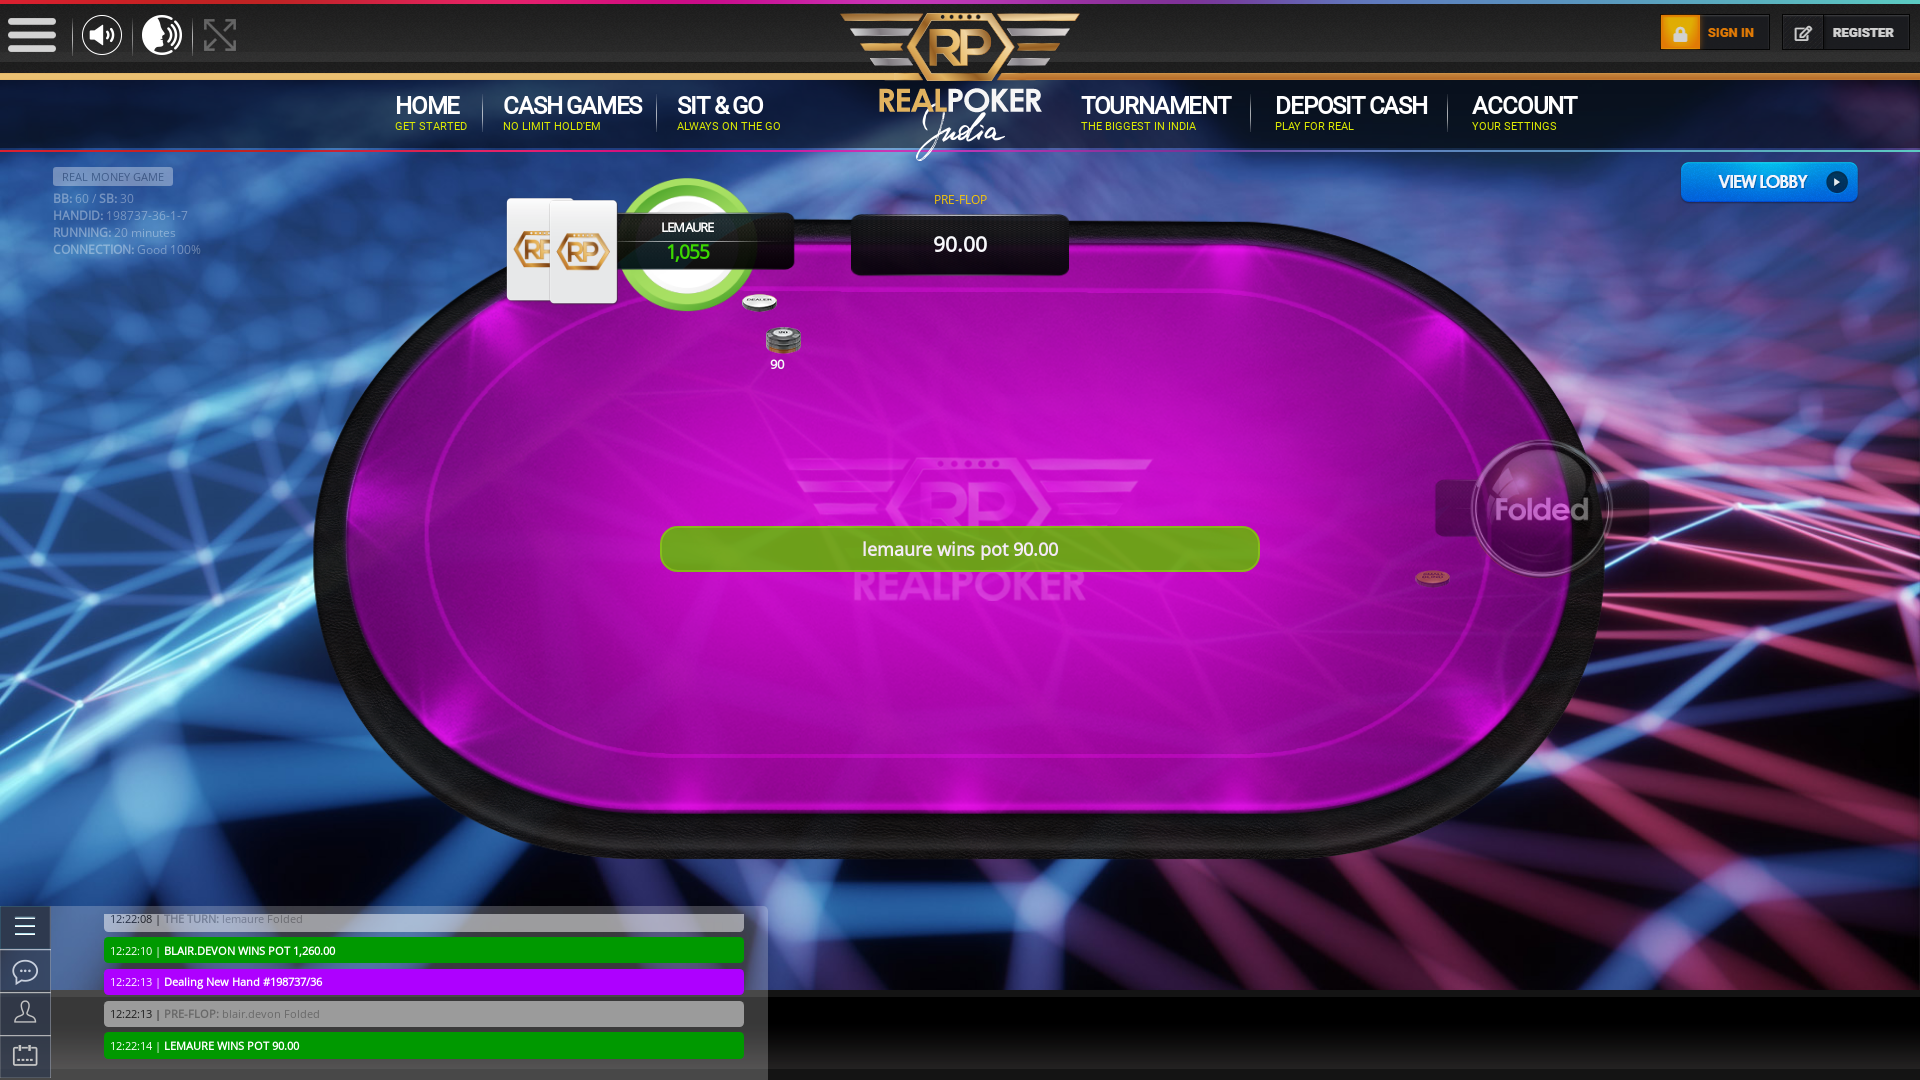 Online poker on a 10 player table in the 20th minute match up